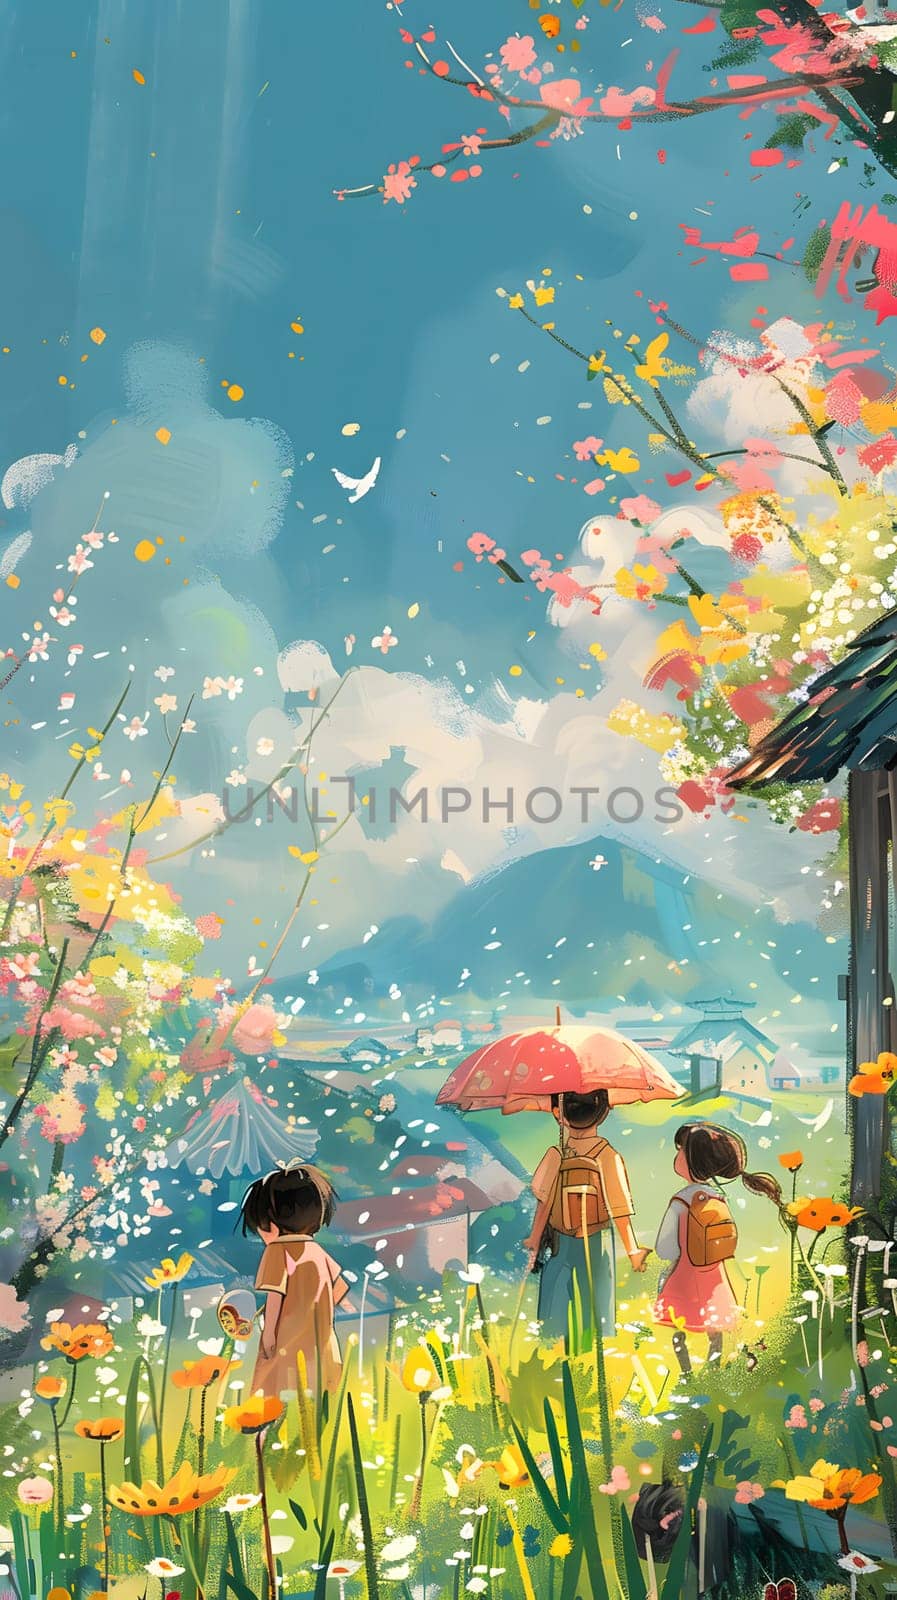 A group of individuals stand in a field of vibrant flowers, each holding an umbrella under the warm sunlight. The natural landscape is filled with colorful botanical vegetation and lush green grass